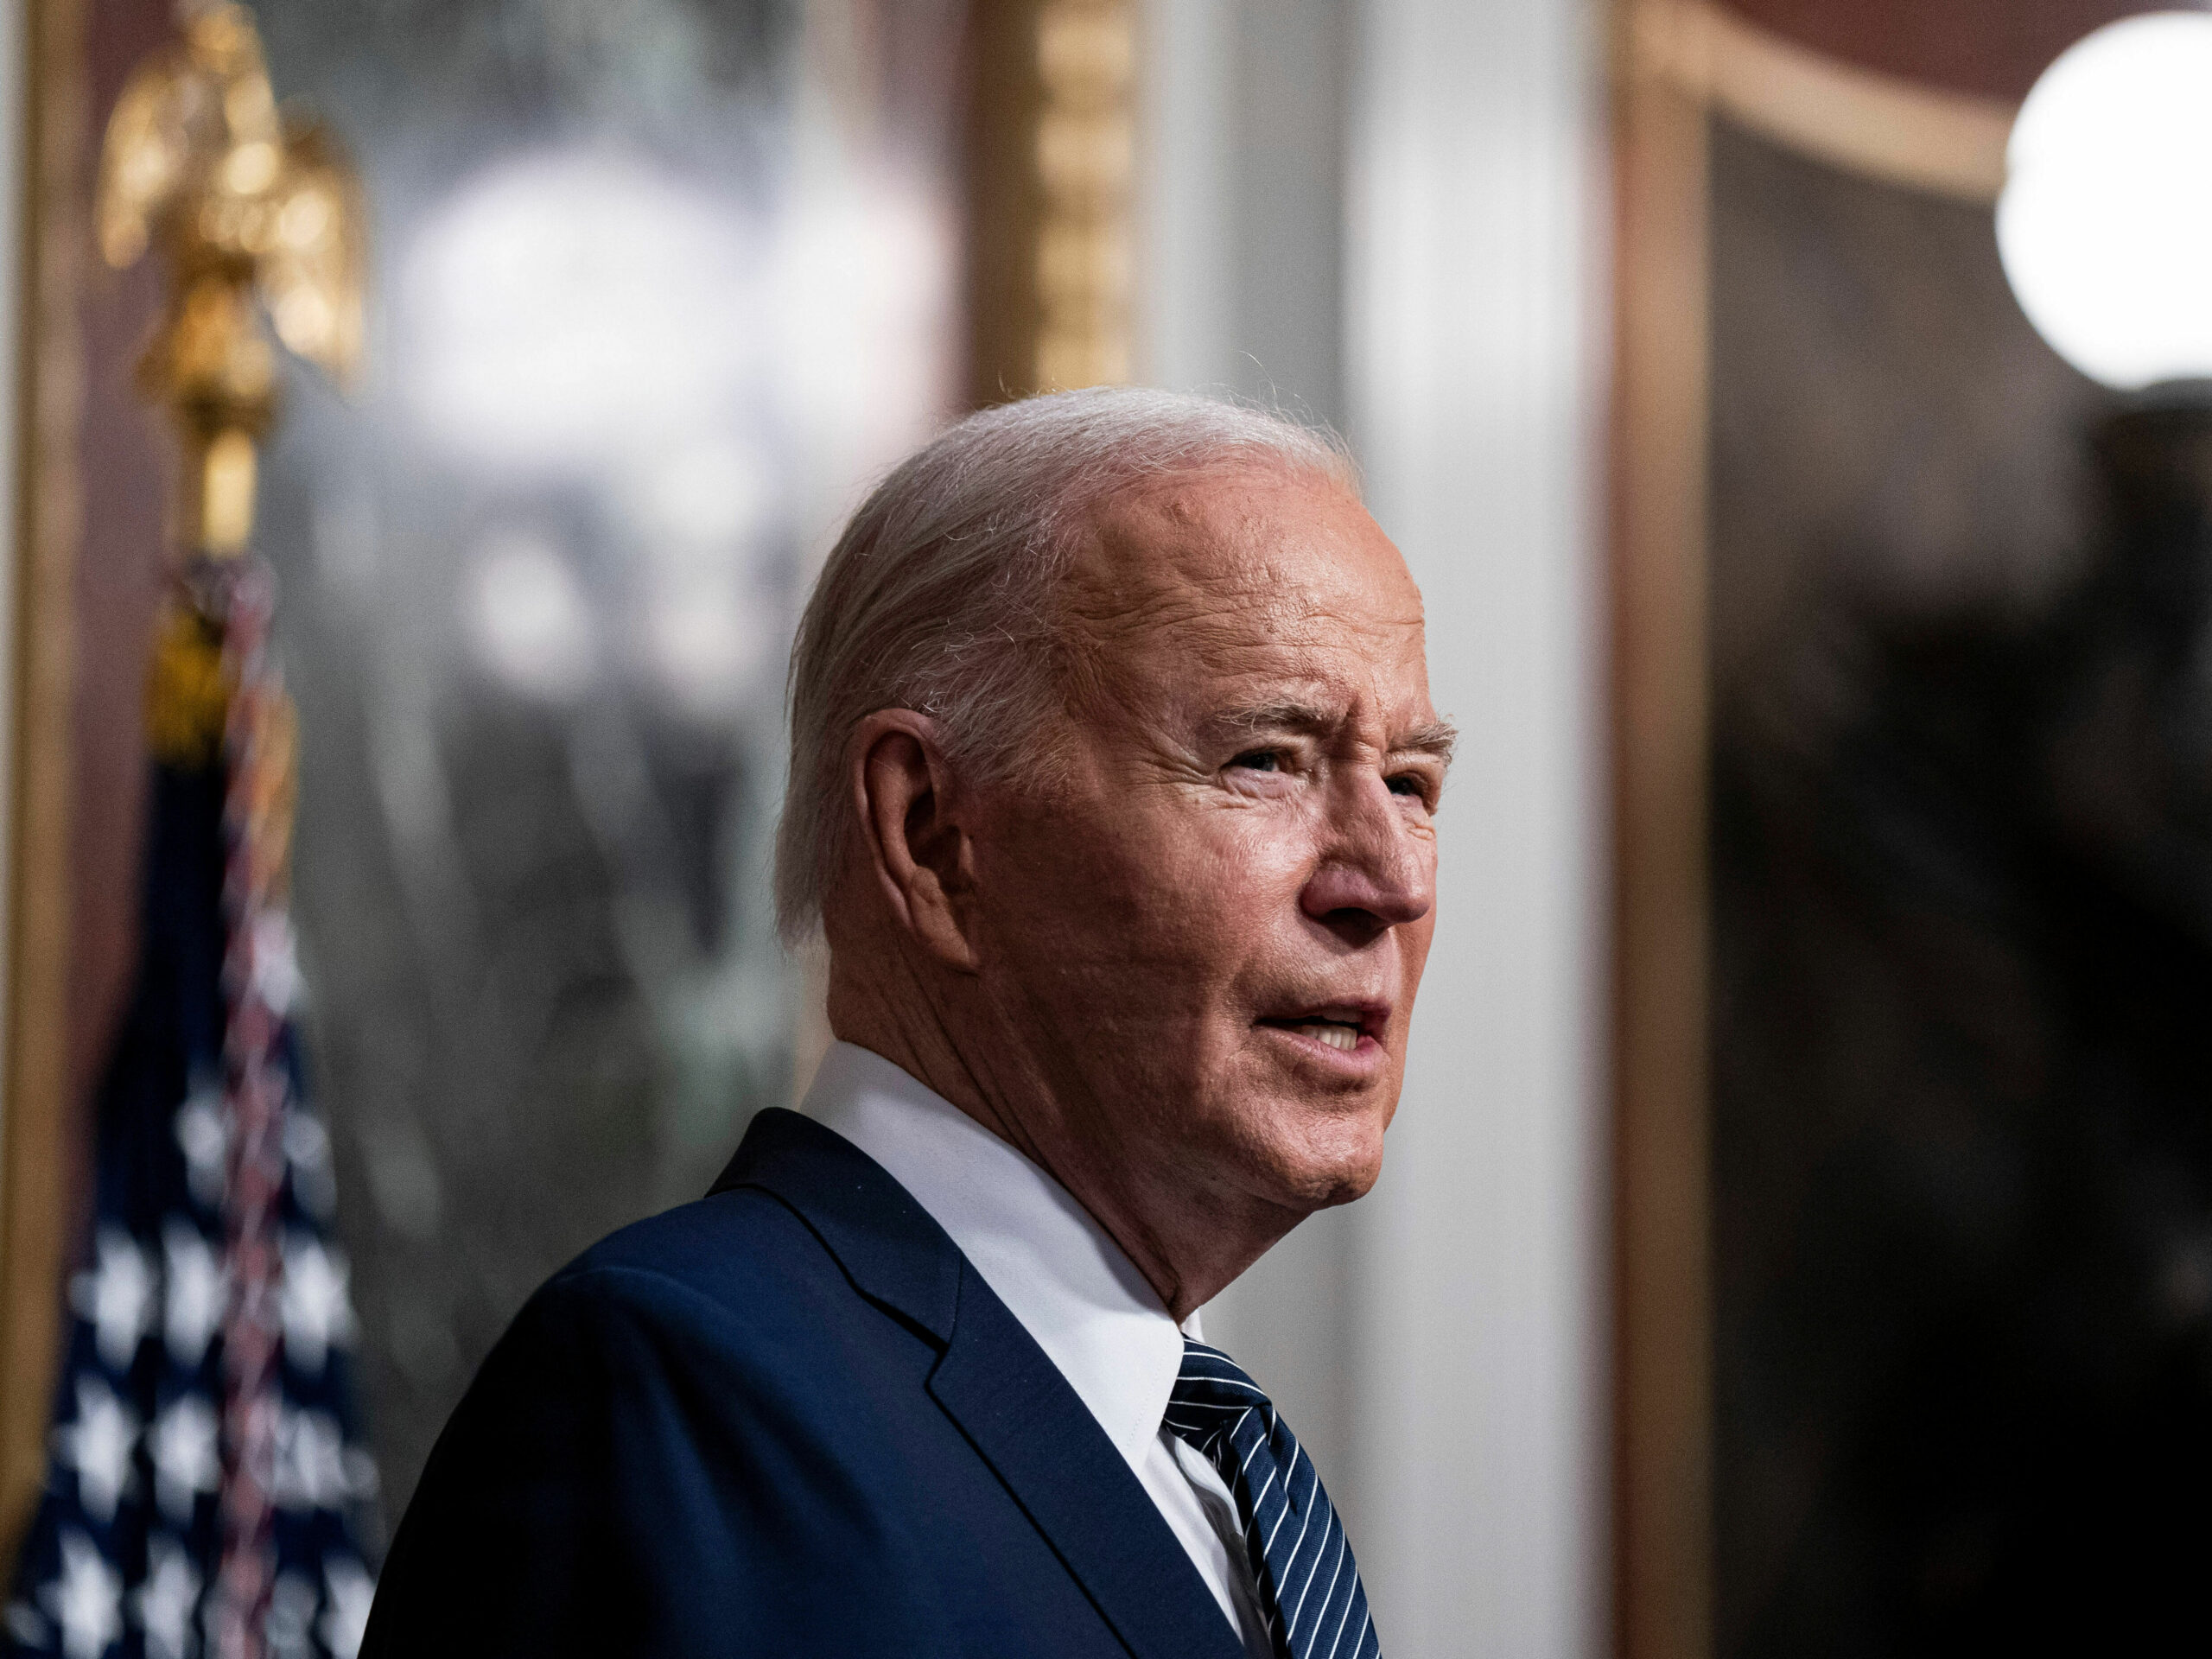 President Biden called Israeli Prime Minister Benjamin Netanyahu on Thursday to express concerns about Israeli strikes that killed aid workers and humanitarian conditions in Gaza.